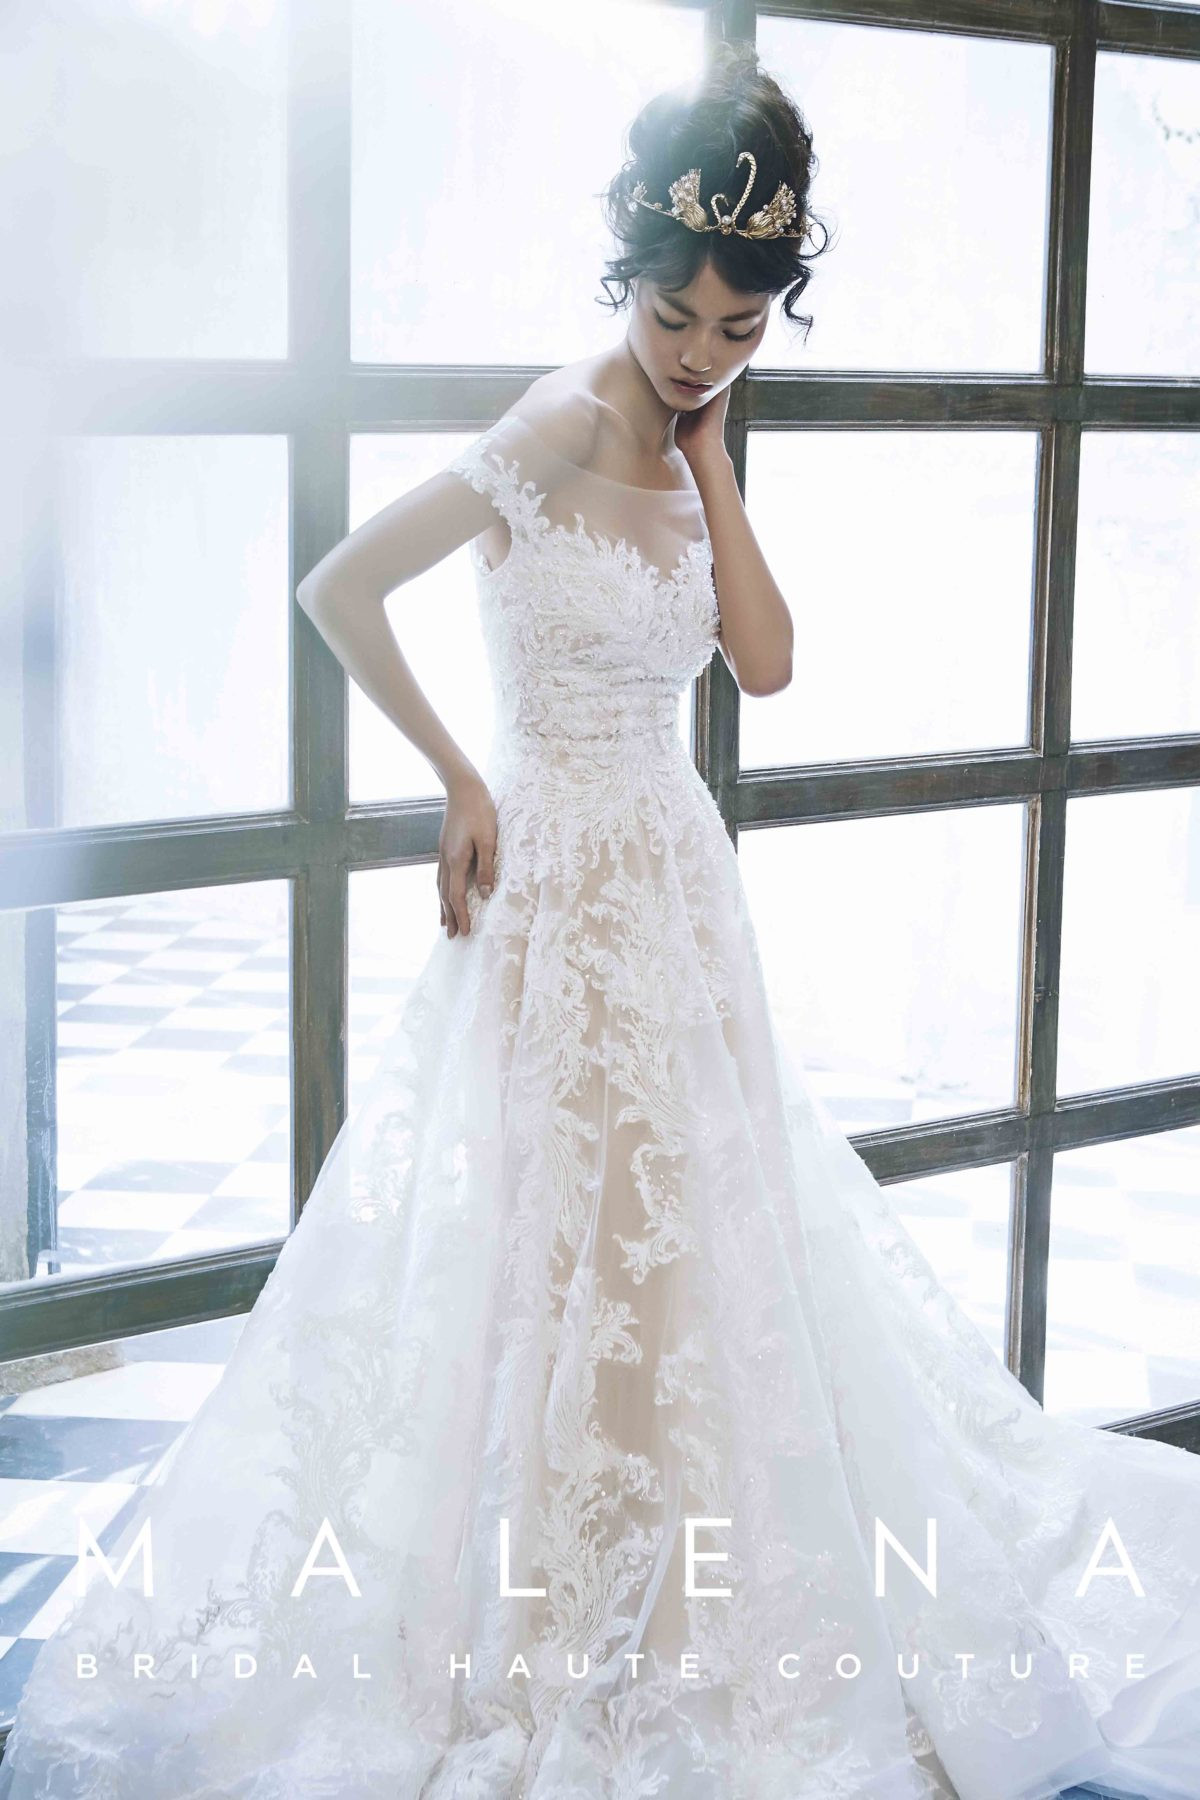 Wedding Gowns For Rent
 Wedding Gown & Bridal Dress Rental Singapore